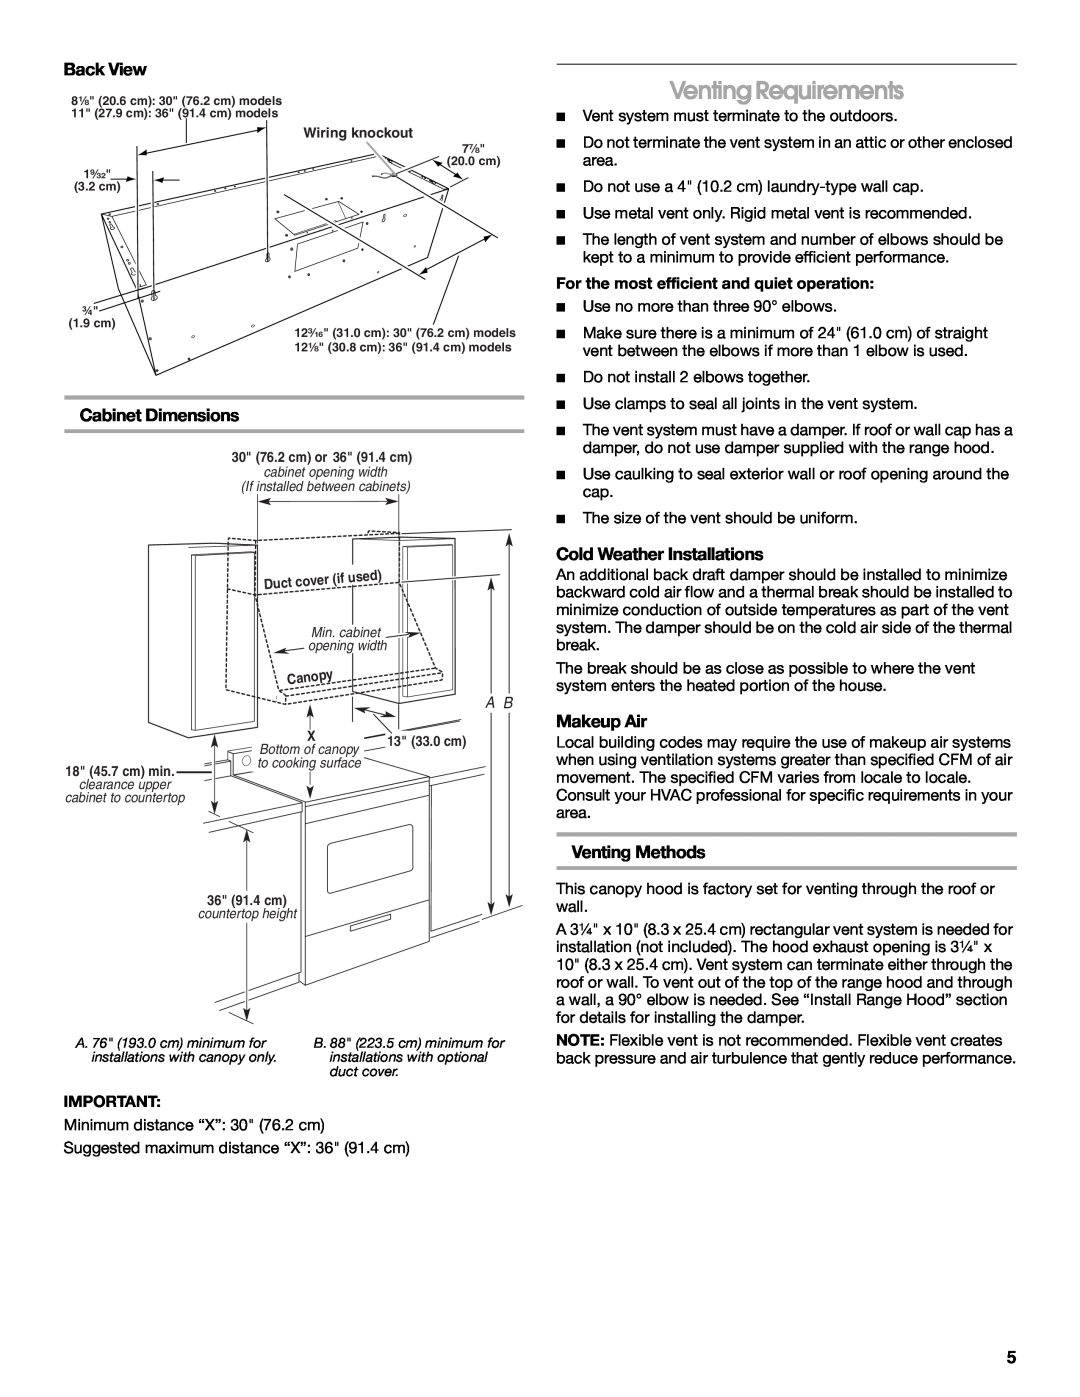 Jenn-Air LI3V3A, W10274318A Venting Requirements, Back View, Cabinet Dimensions, Cold Weather Installations, Makeup Air 